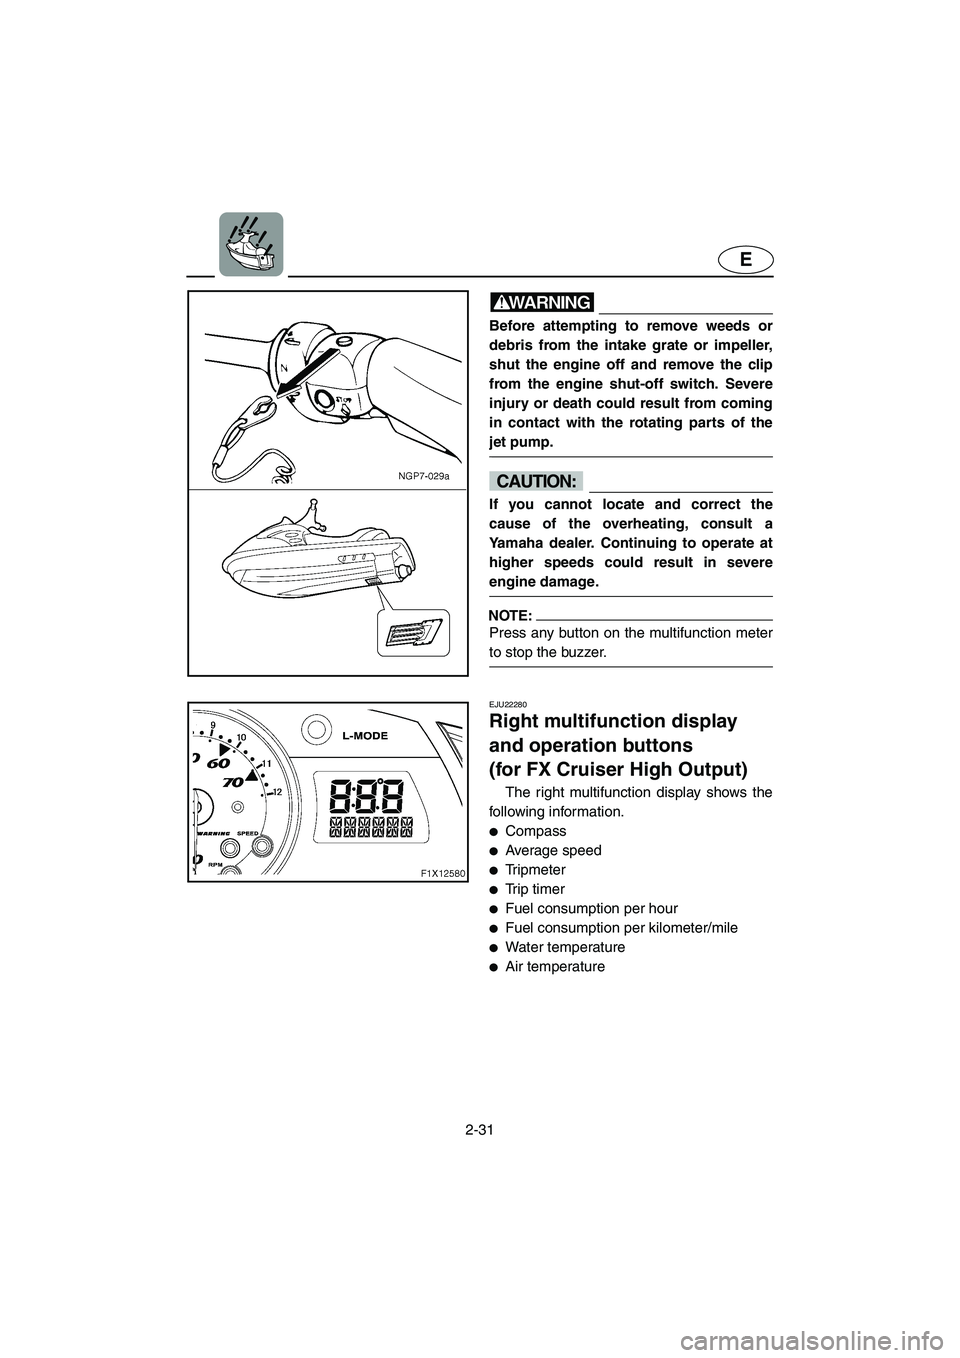 YAMAHA FX HO 2006  Owners Manual 2-31
E
WARNING@ Before attempting to remove weeds or
debris from the intake grate or impeller,
shut the engine off and remove the clip
from the engine shut-off switch. Severe
injury or death could res